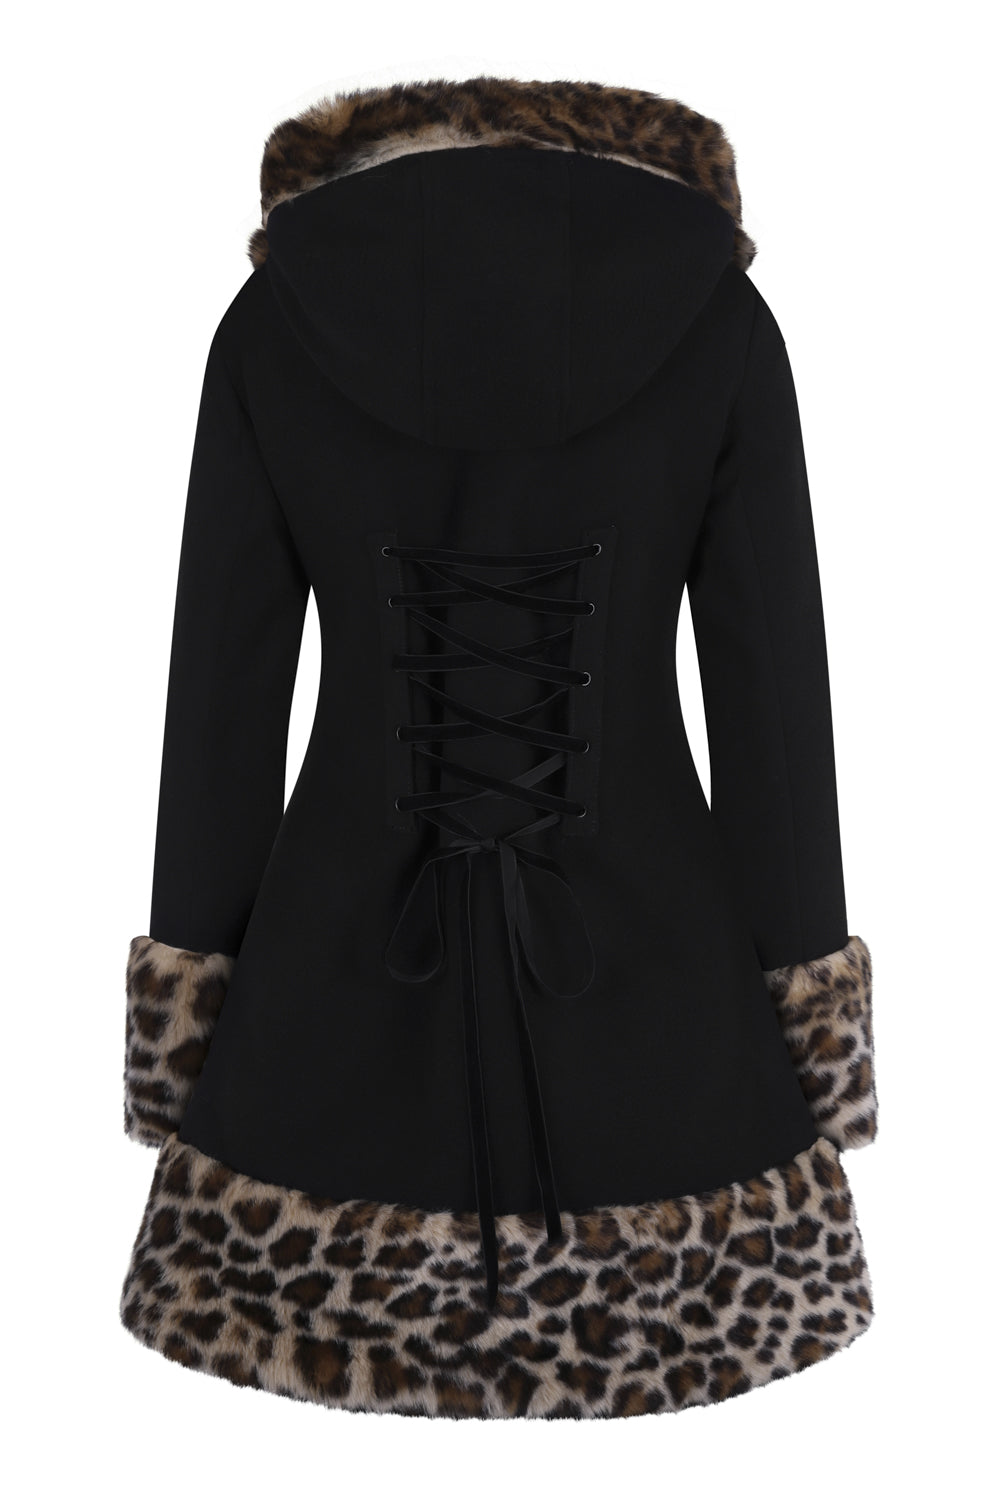 Leah Jane Coat by Hell Bunny